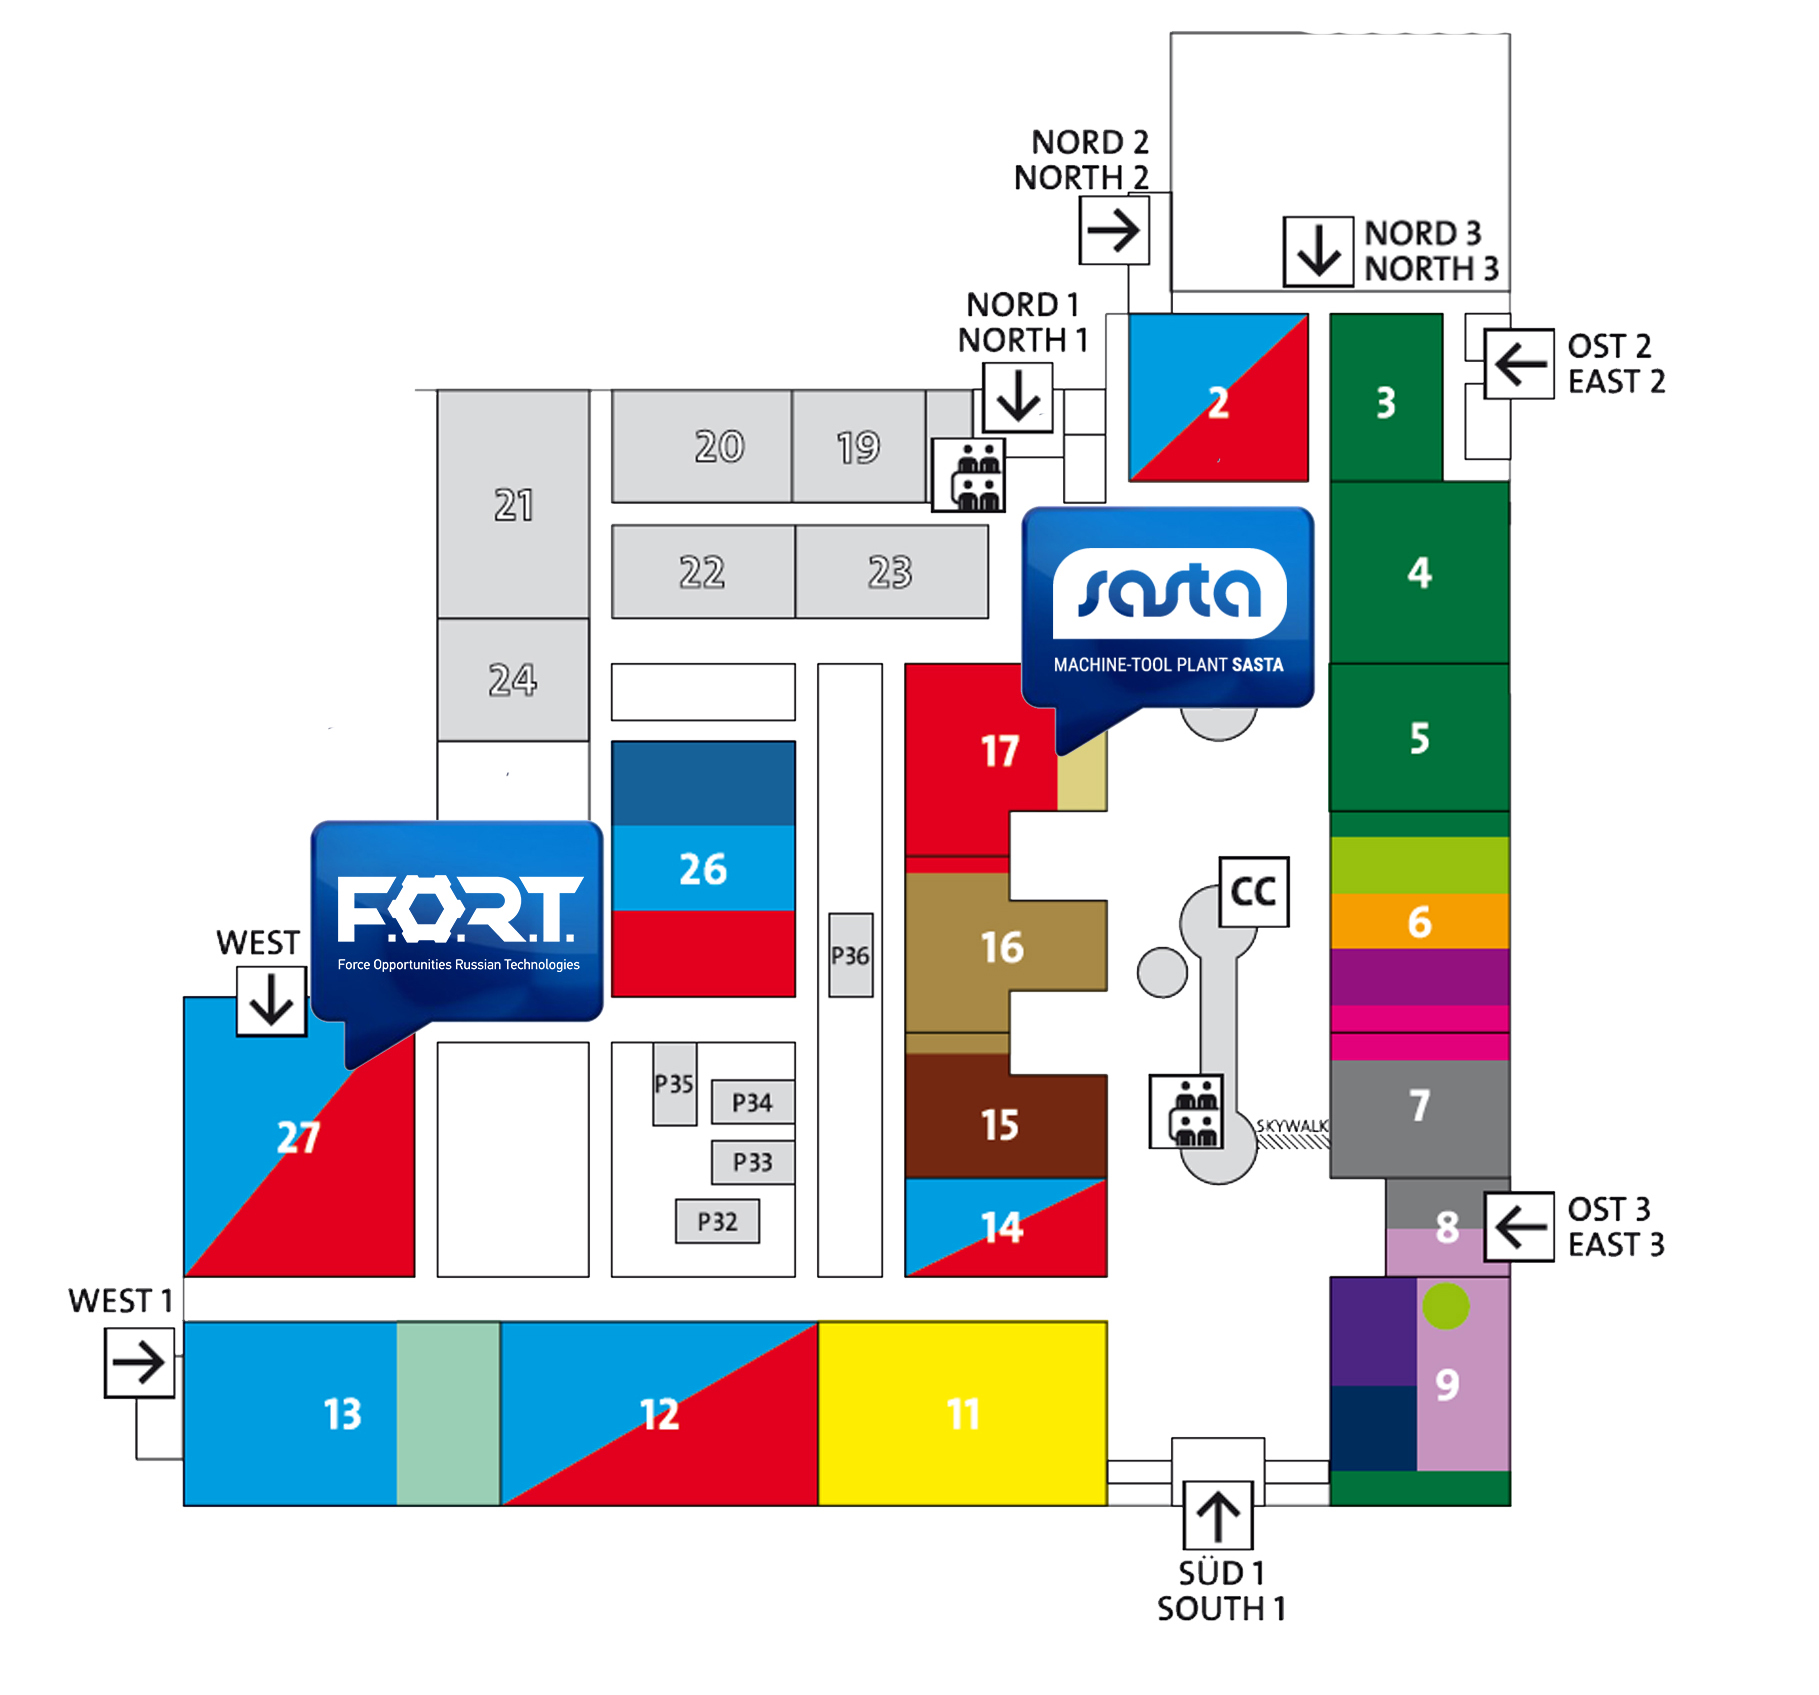 We invite to visit our companies booths at  «EMO Hannover 2019» exhibition